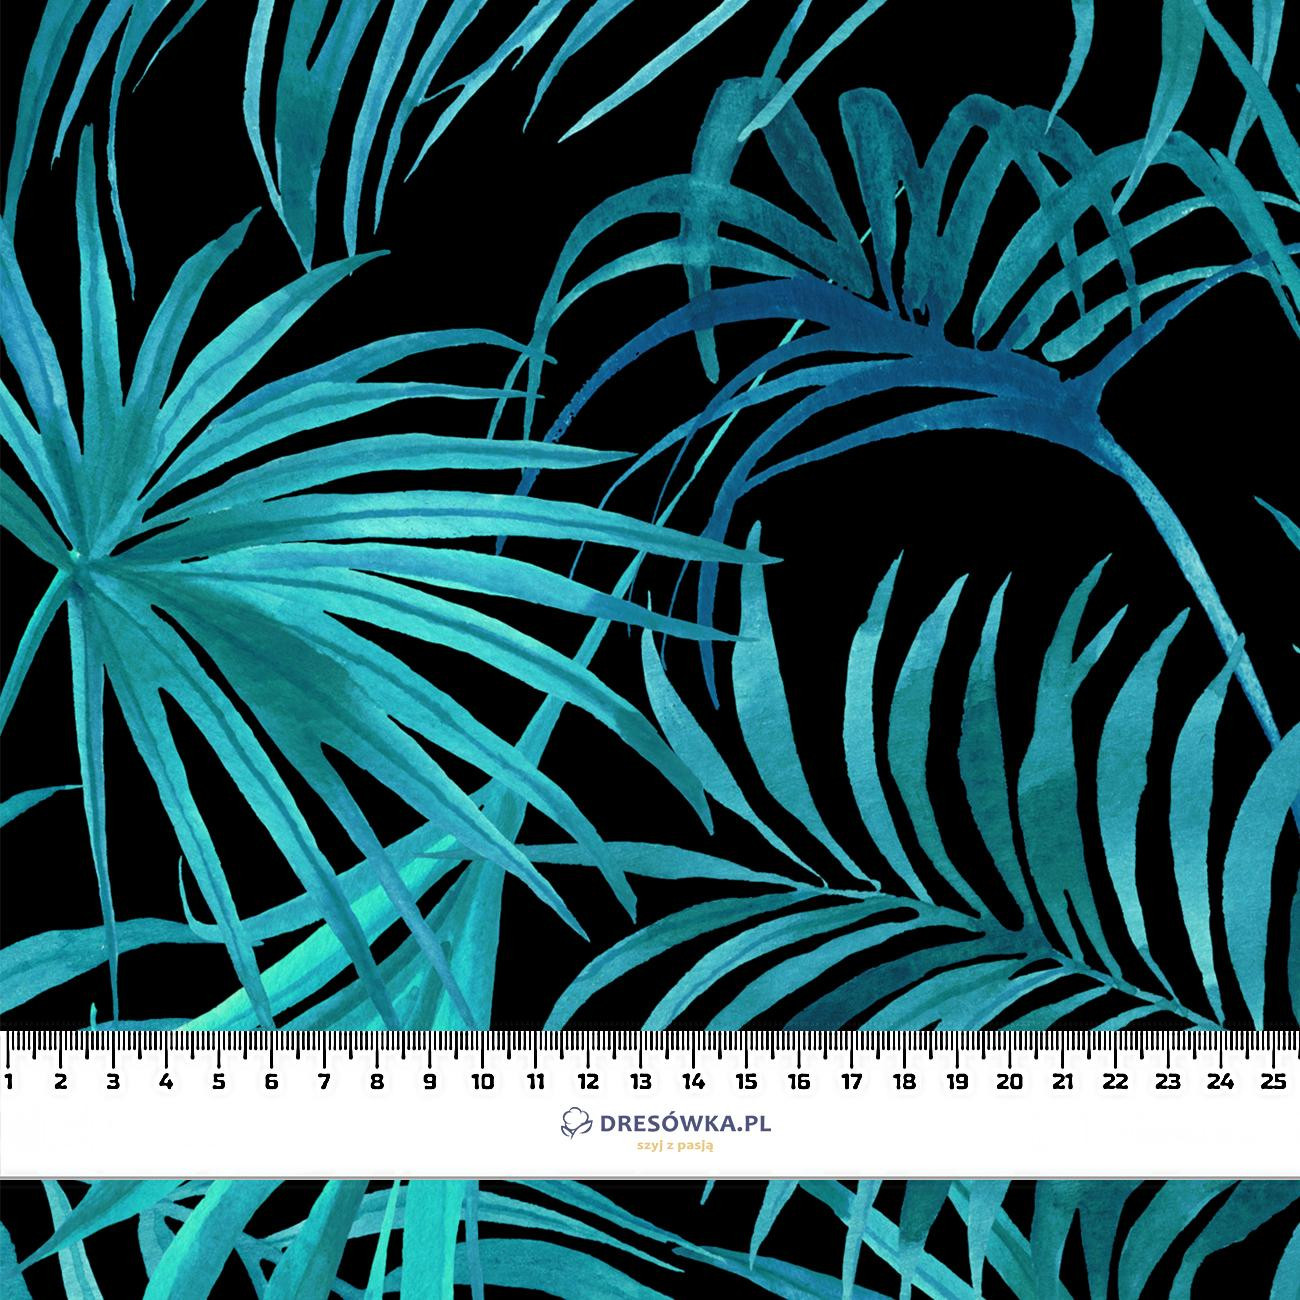 PALM LEAVES pat. 5 / black - quick-drying woven fabric